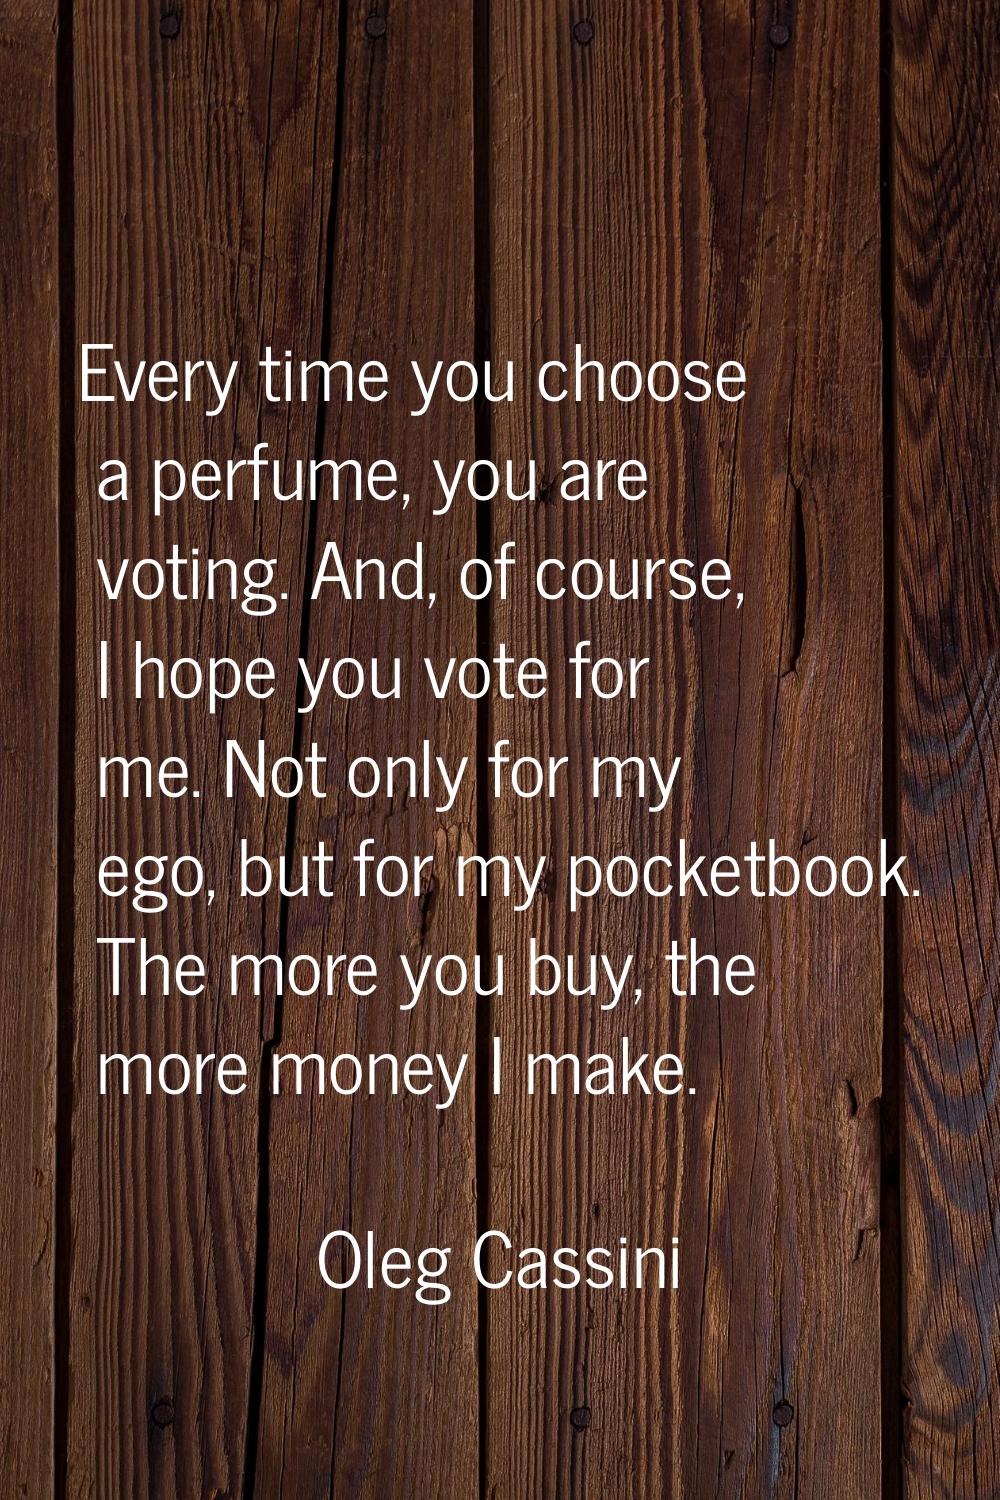 Every time you choose a perfume, you are voting. And, of course, I hope you vote for me. Not only f